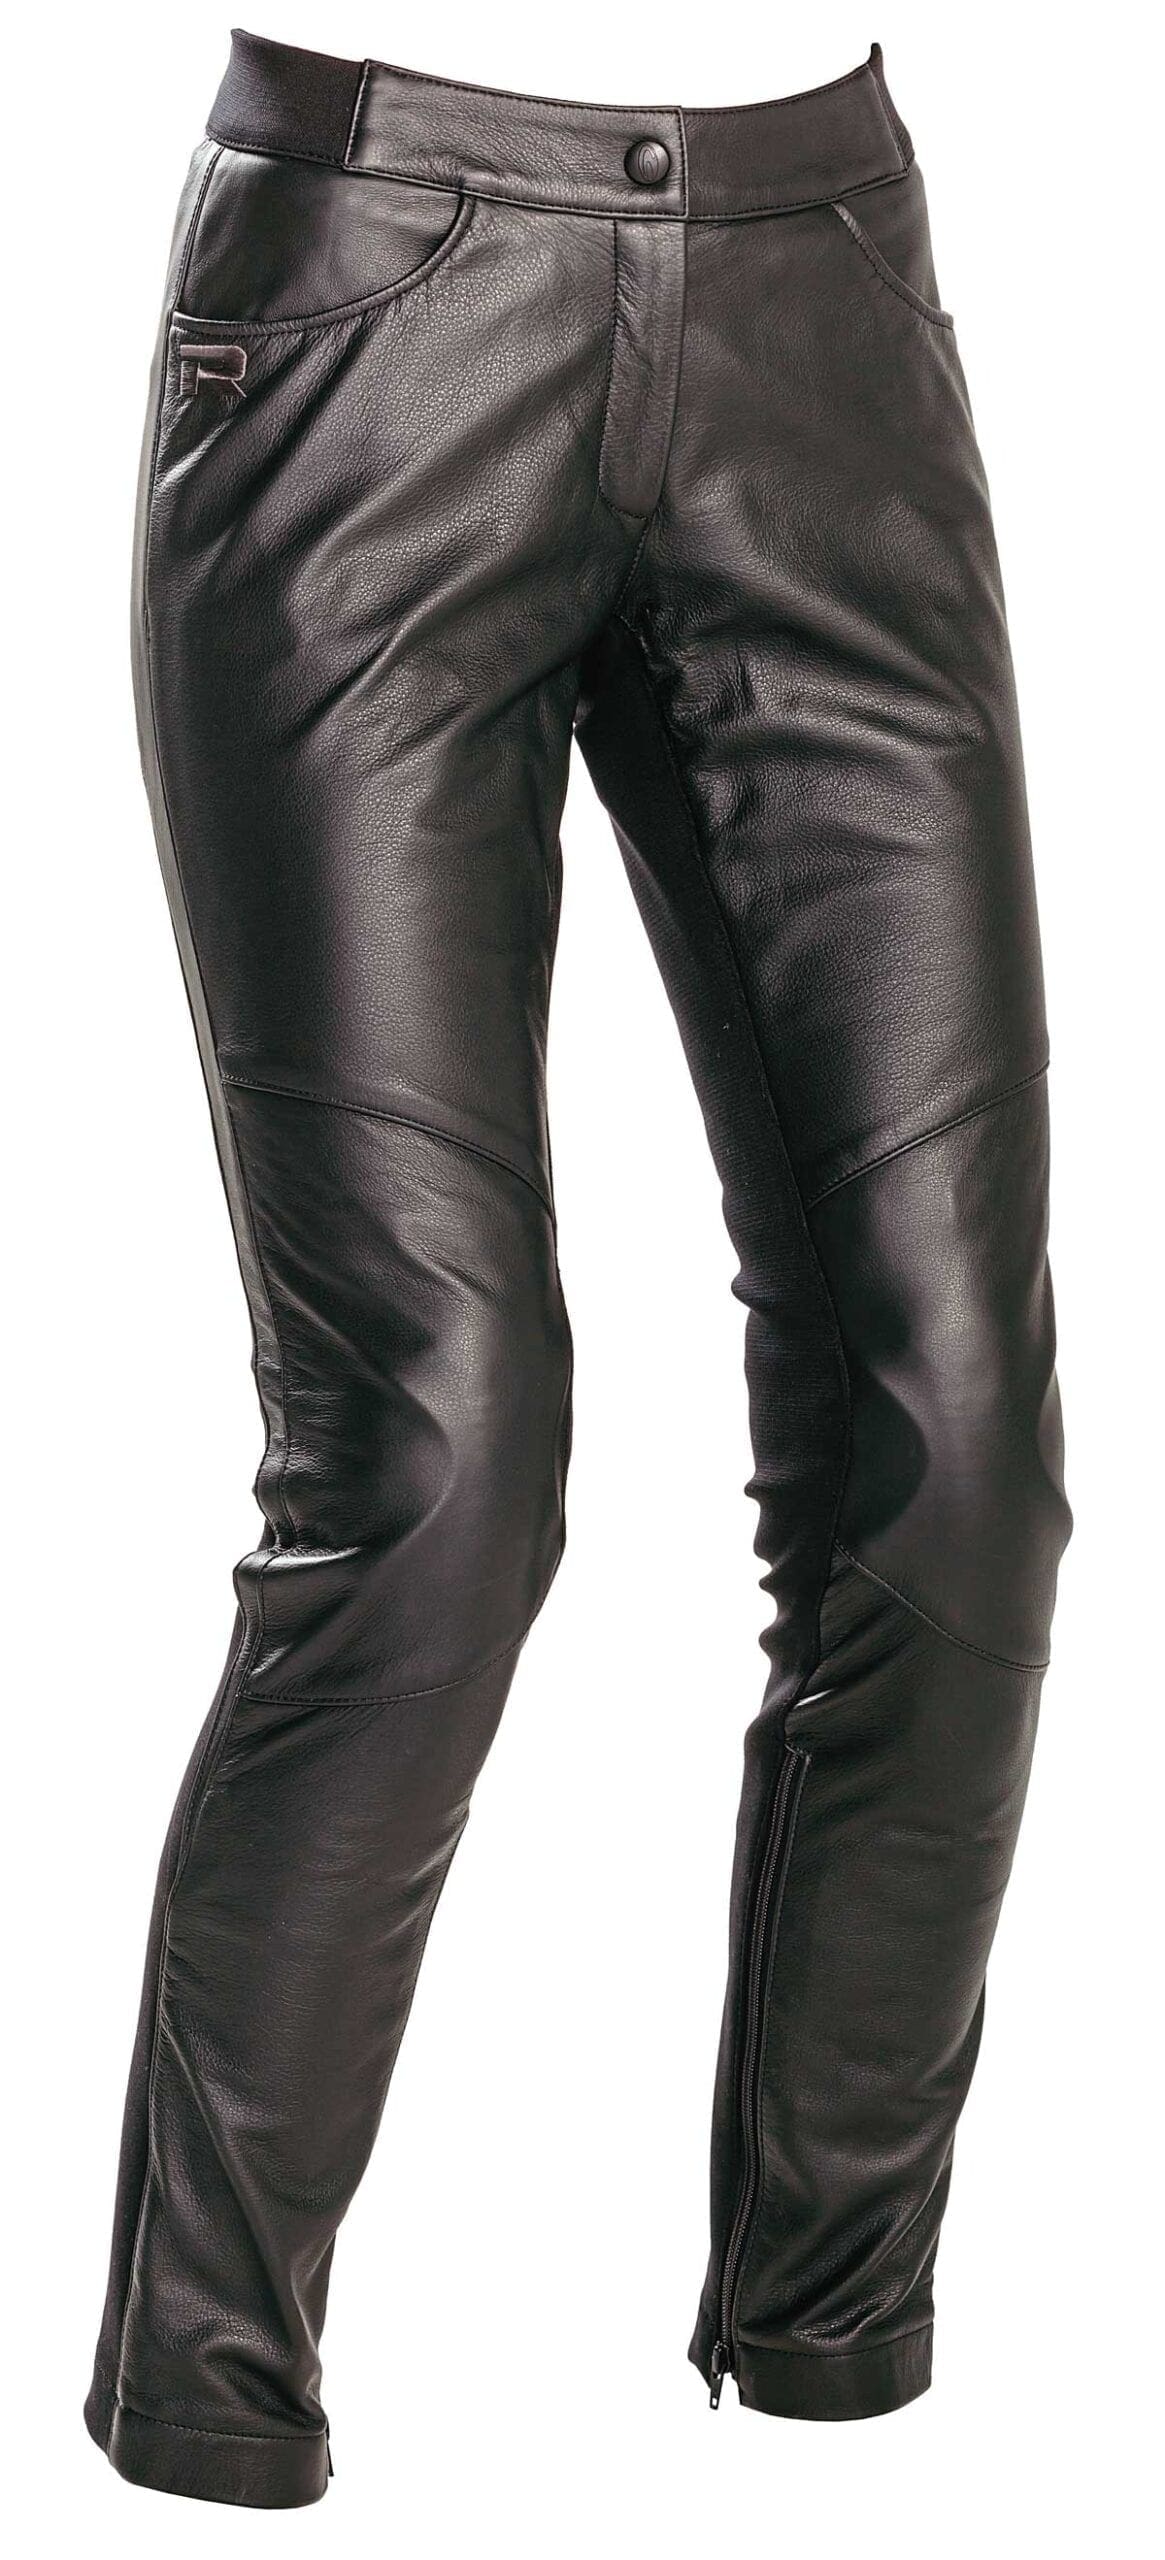 PRODUCT: Richa Catwalk ladies leather trousers